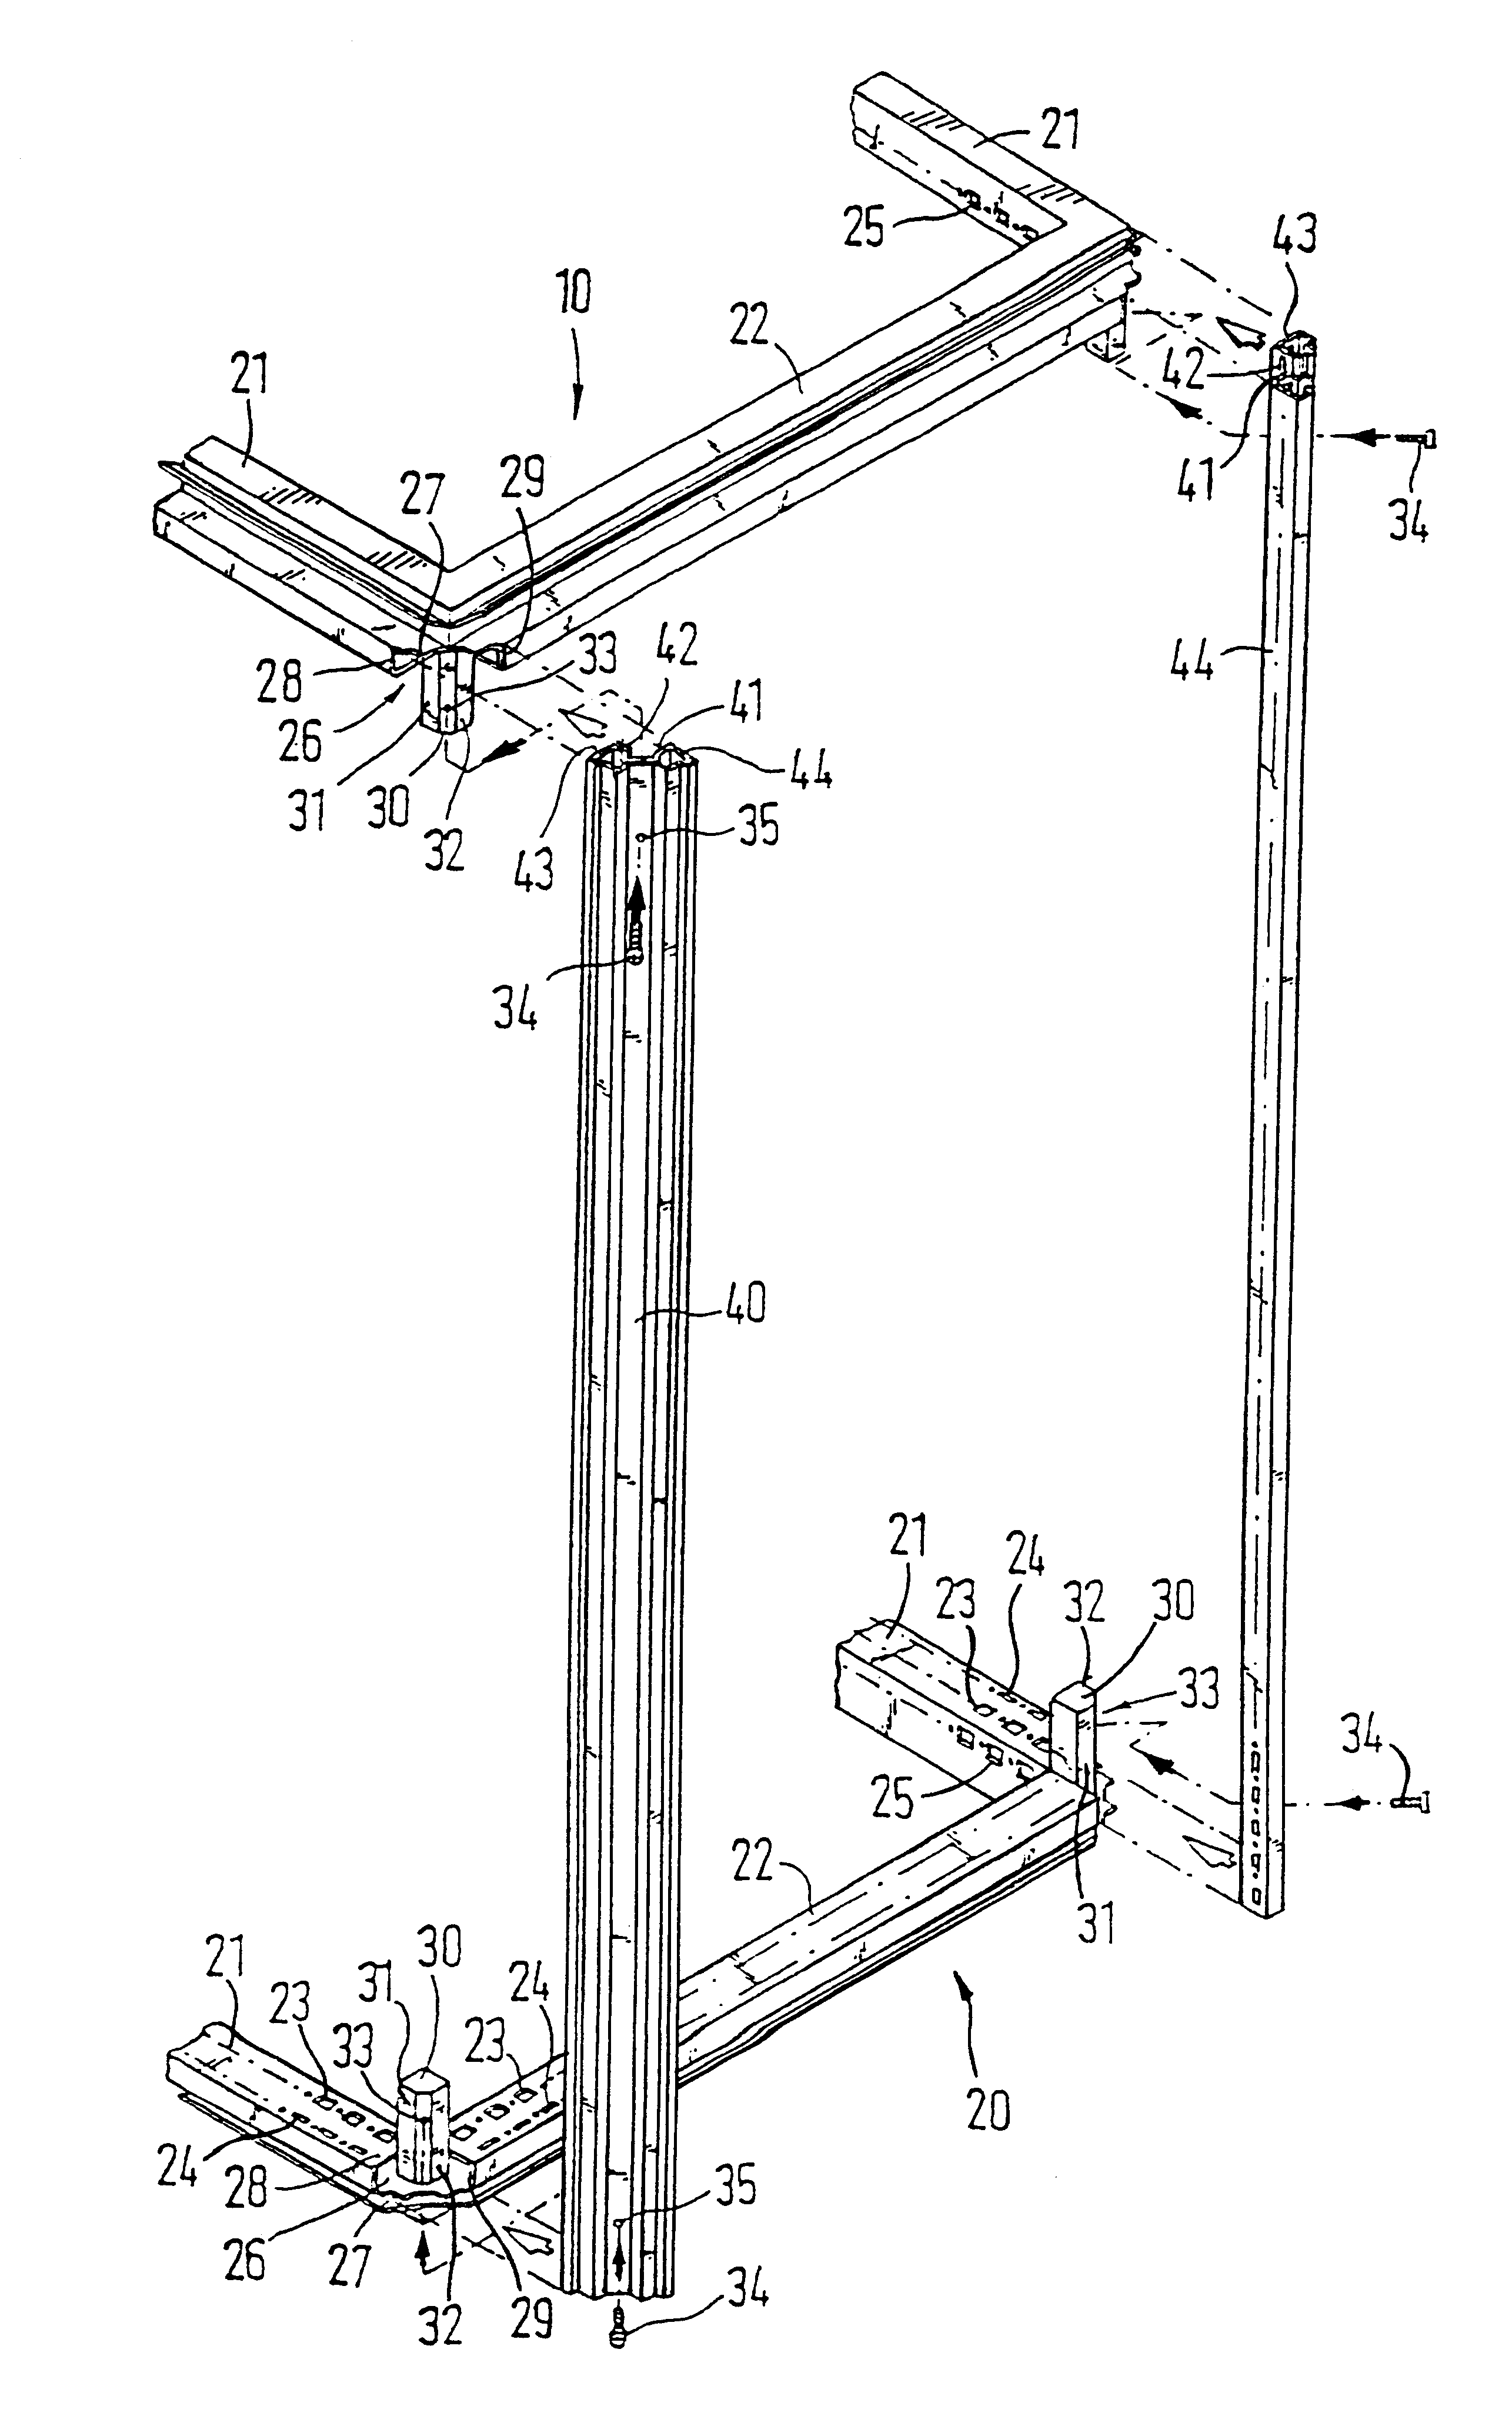 Kit for a rack with a corner connector for vertical frame pieces